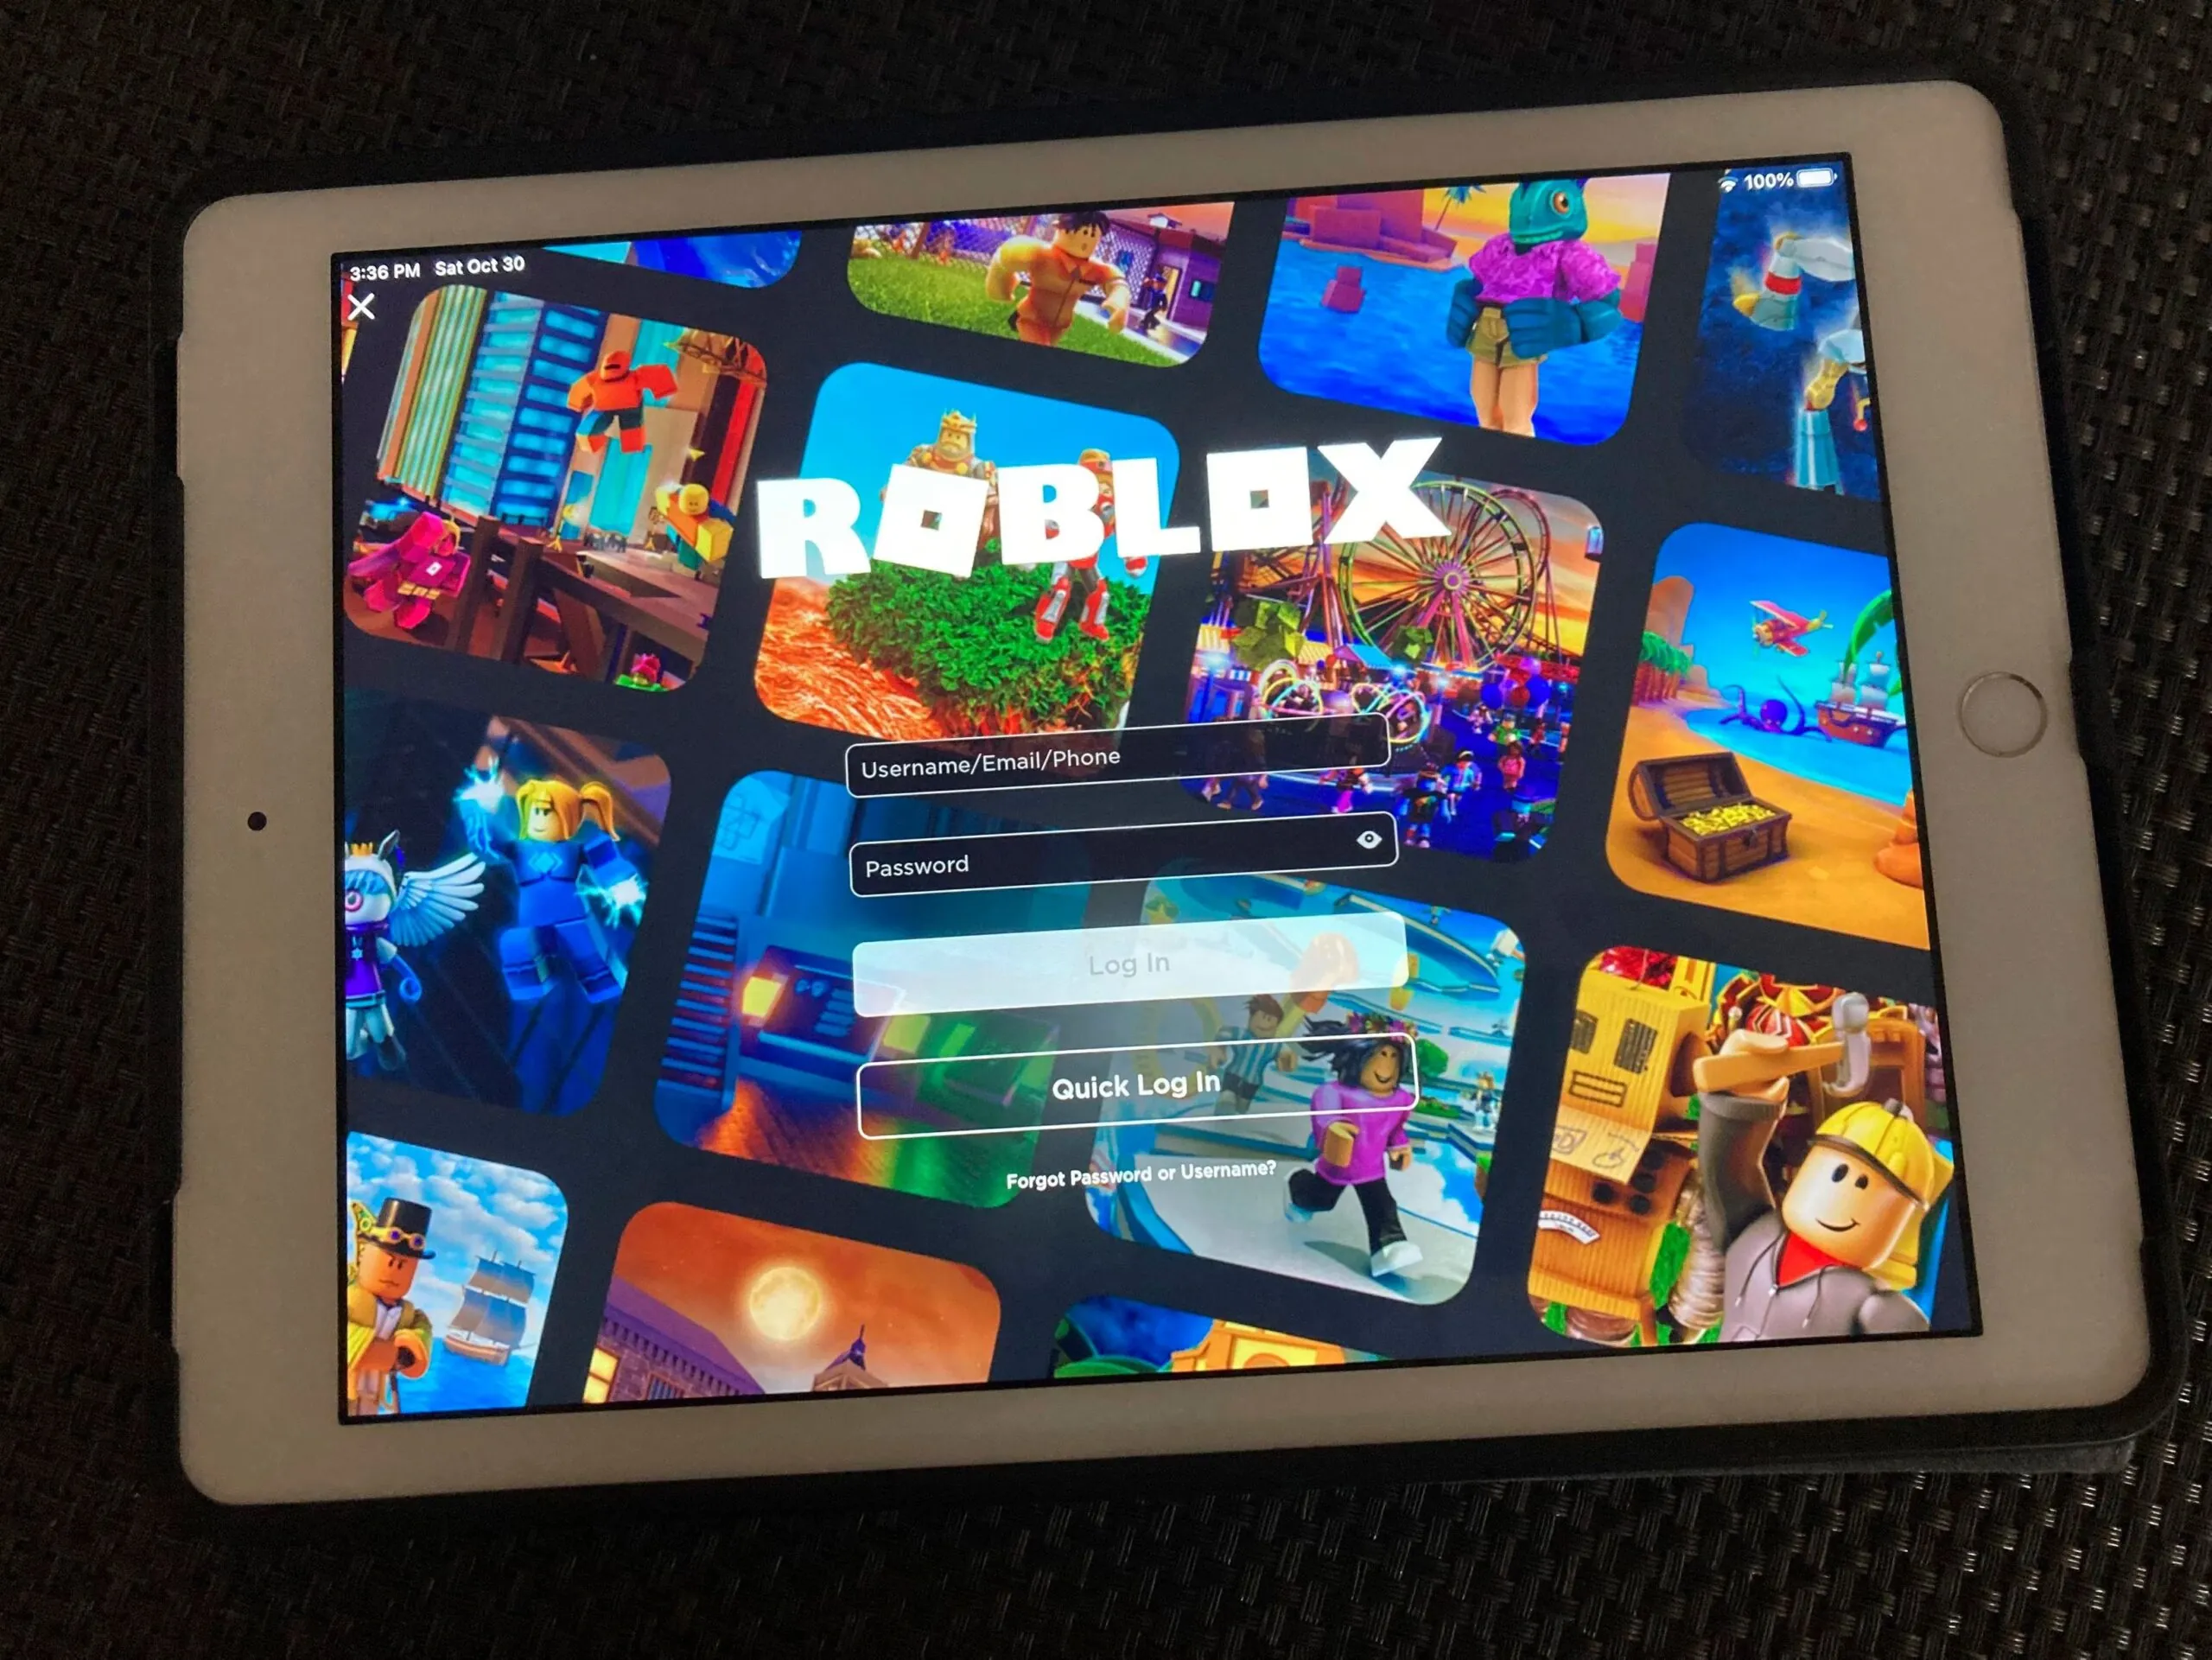 Kidnapped N.J. girl, 11, chatted online with man on Roblox game, cops say